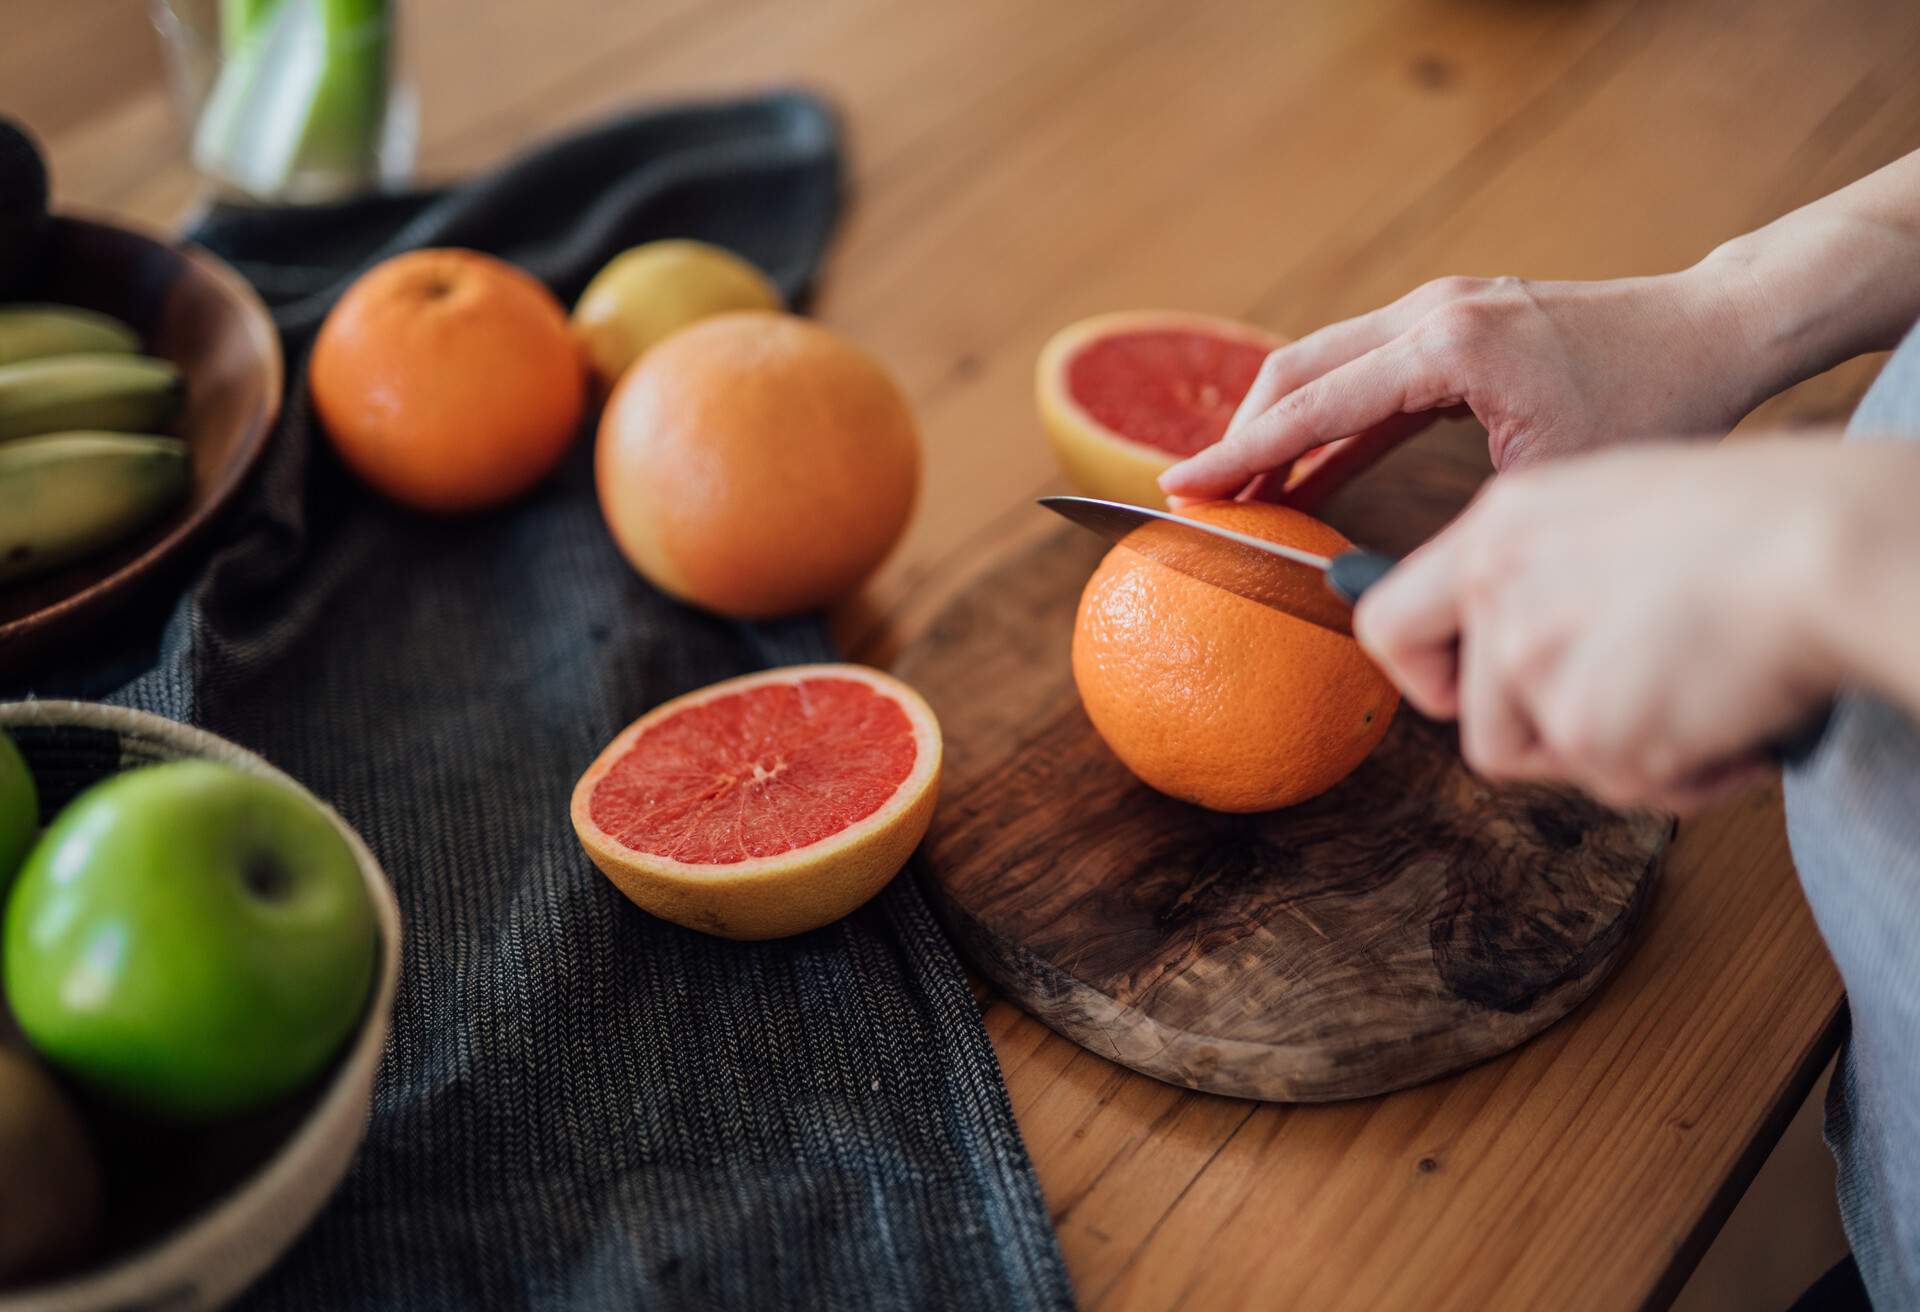 Close up shot of woman's hands chopping oranges and grapefruits for squeezing homemade juice in kitchen.